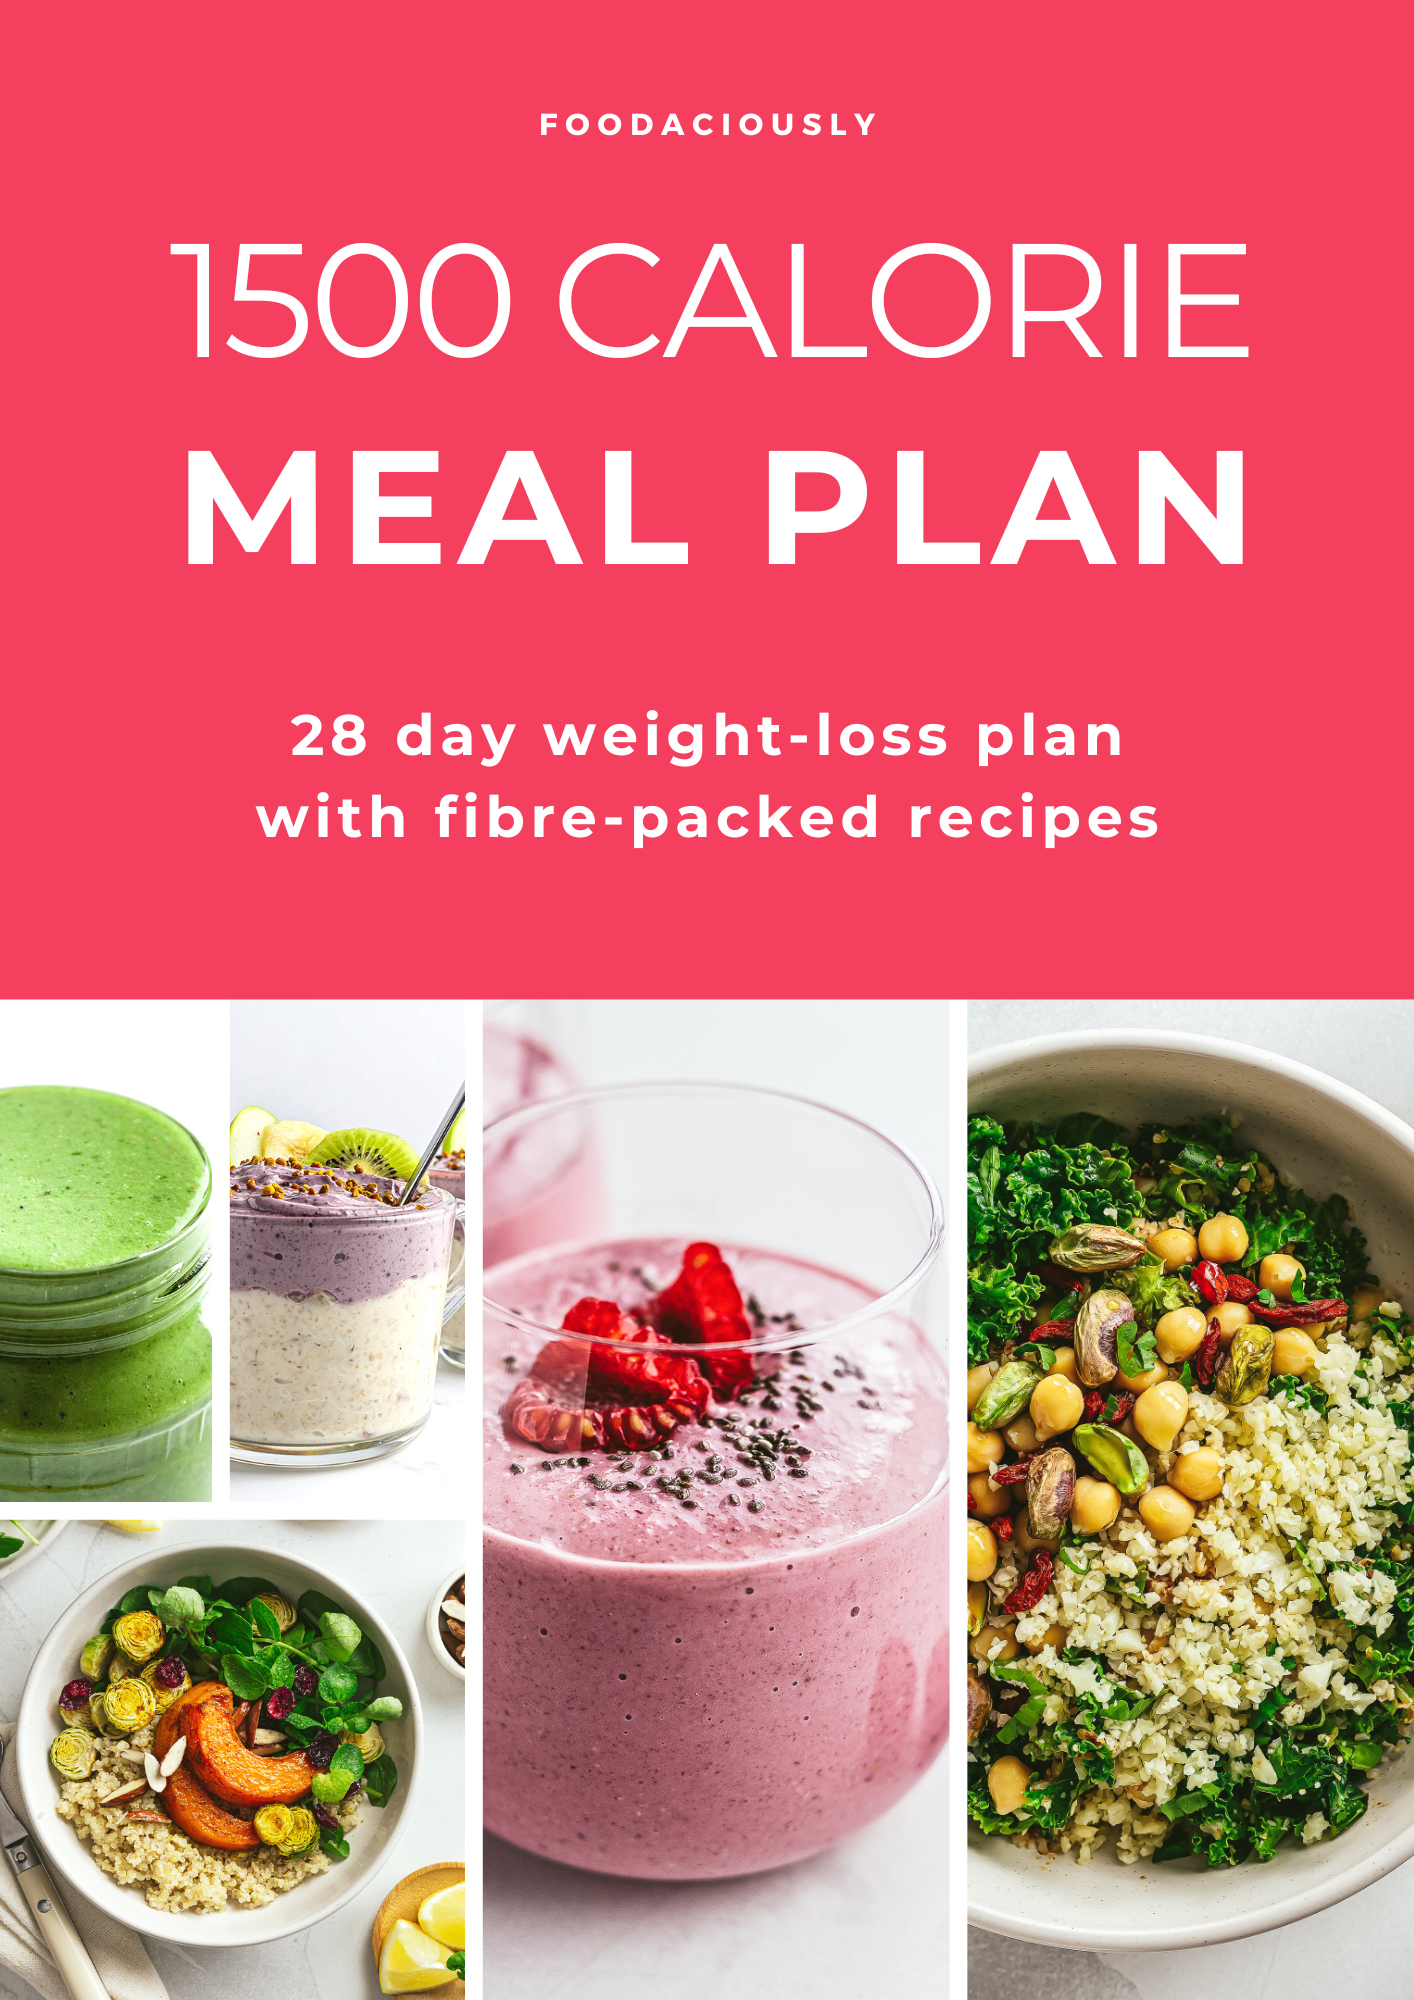 1500 Calorie Weight-Loss Meal Plan